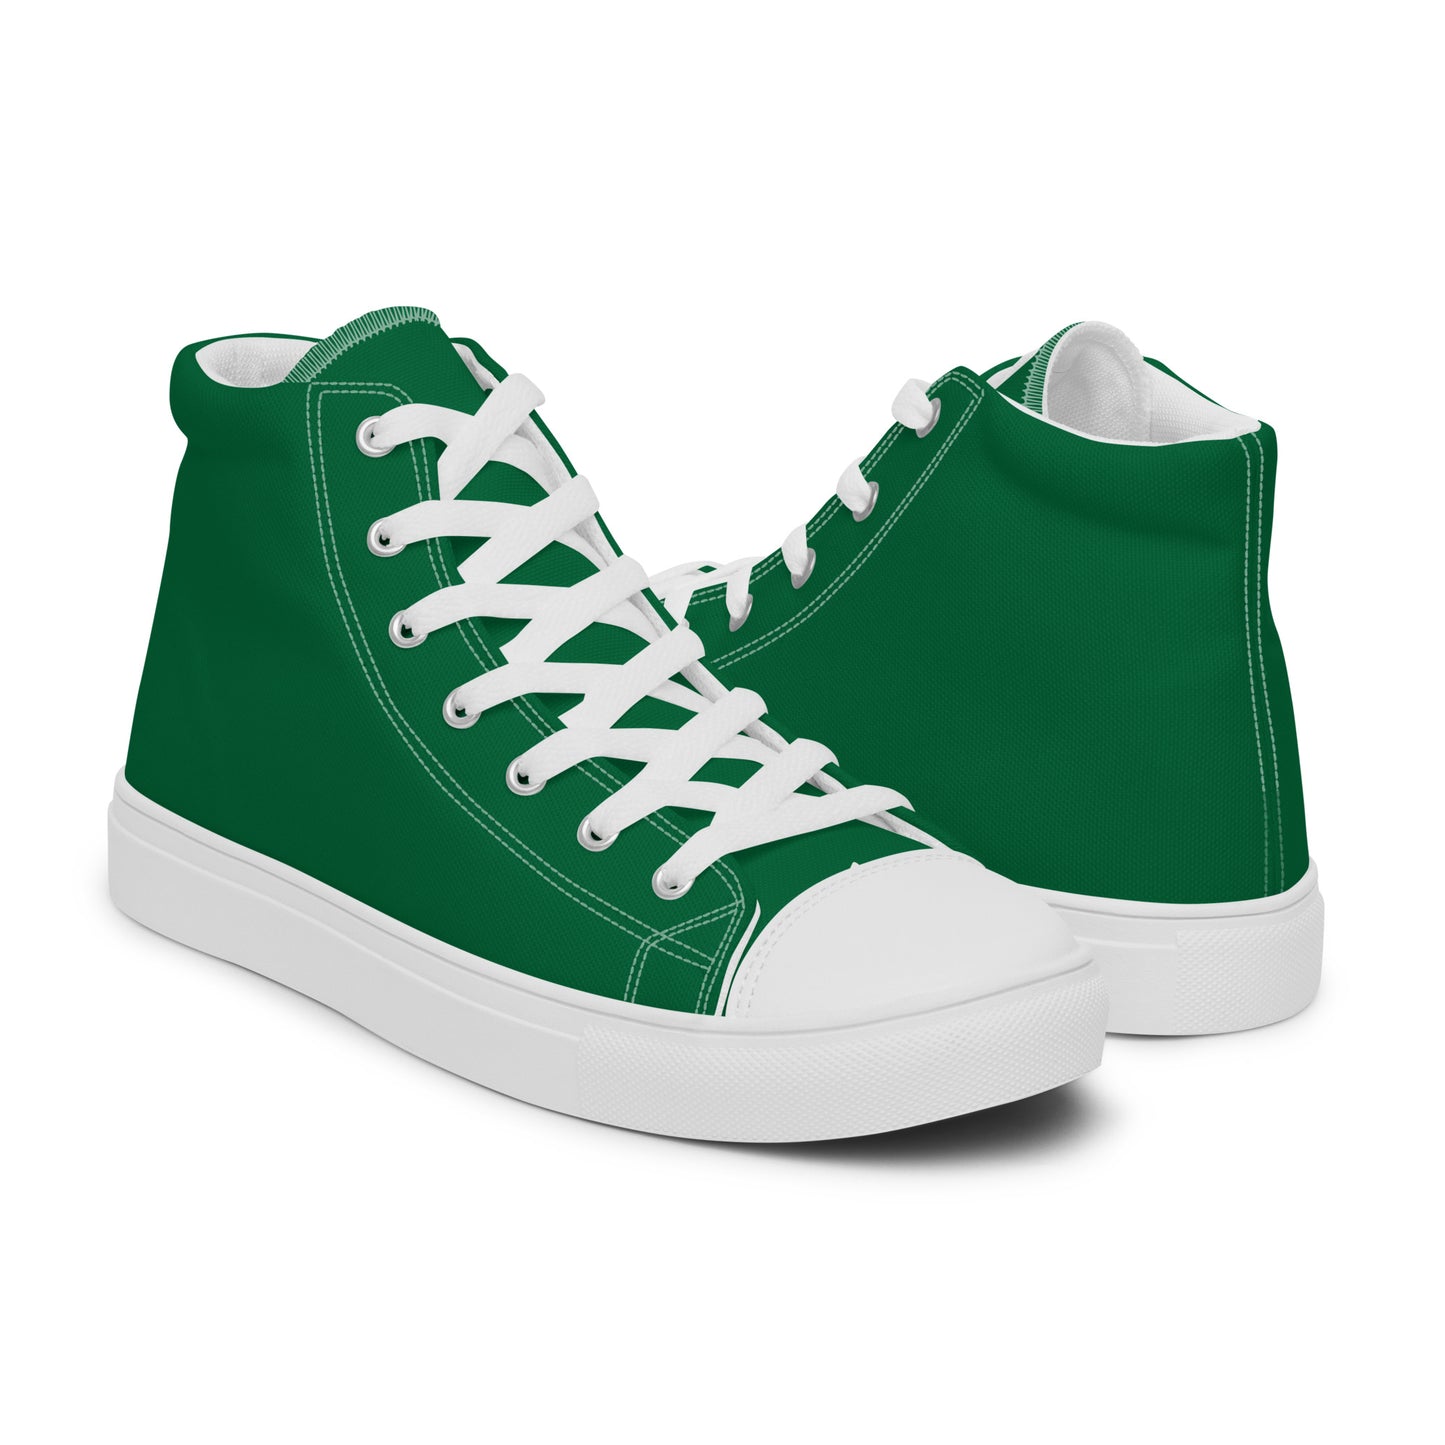 Pine - Sustainably Made Men's High Top Canvas Shoes